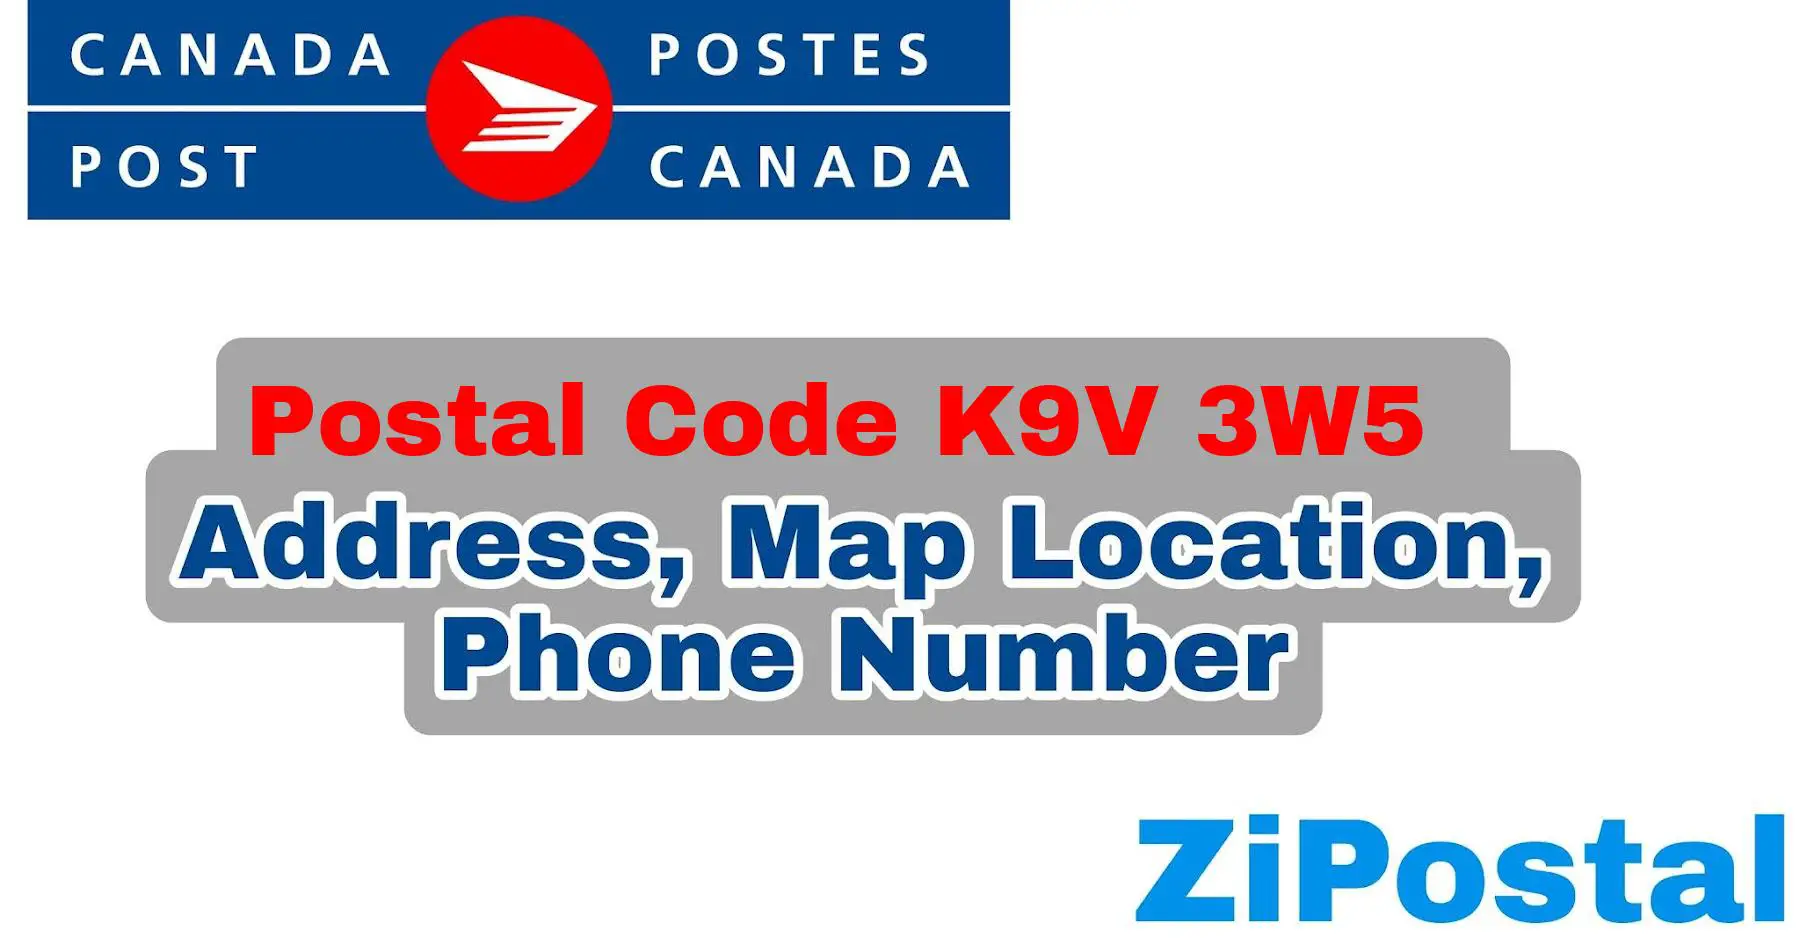 Postal Code K9V 3W5 Address Map Location and Phone Number